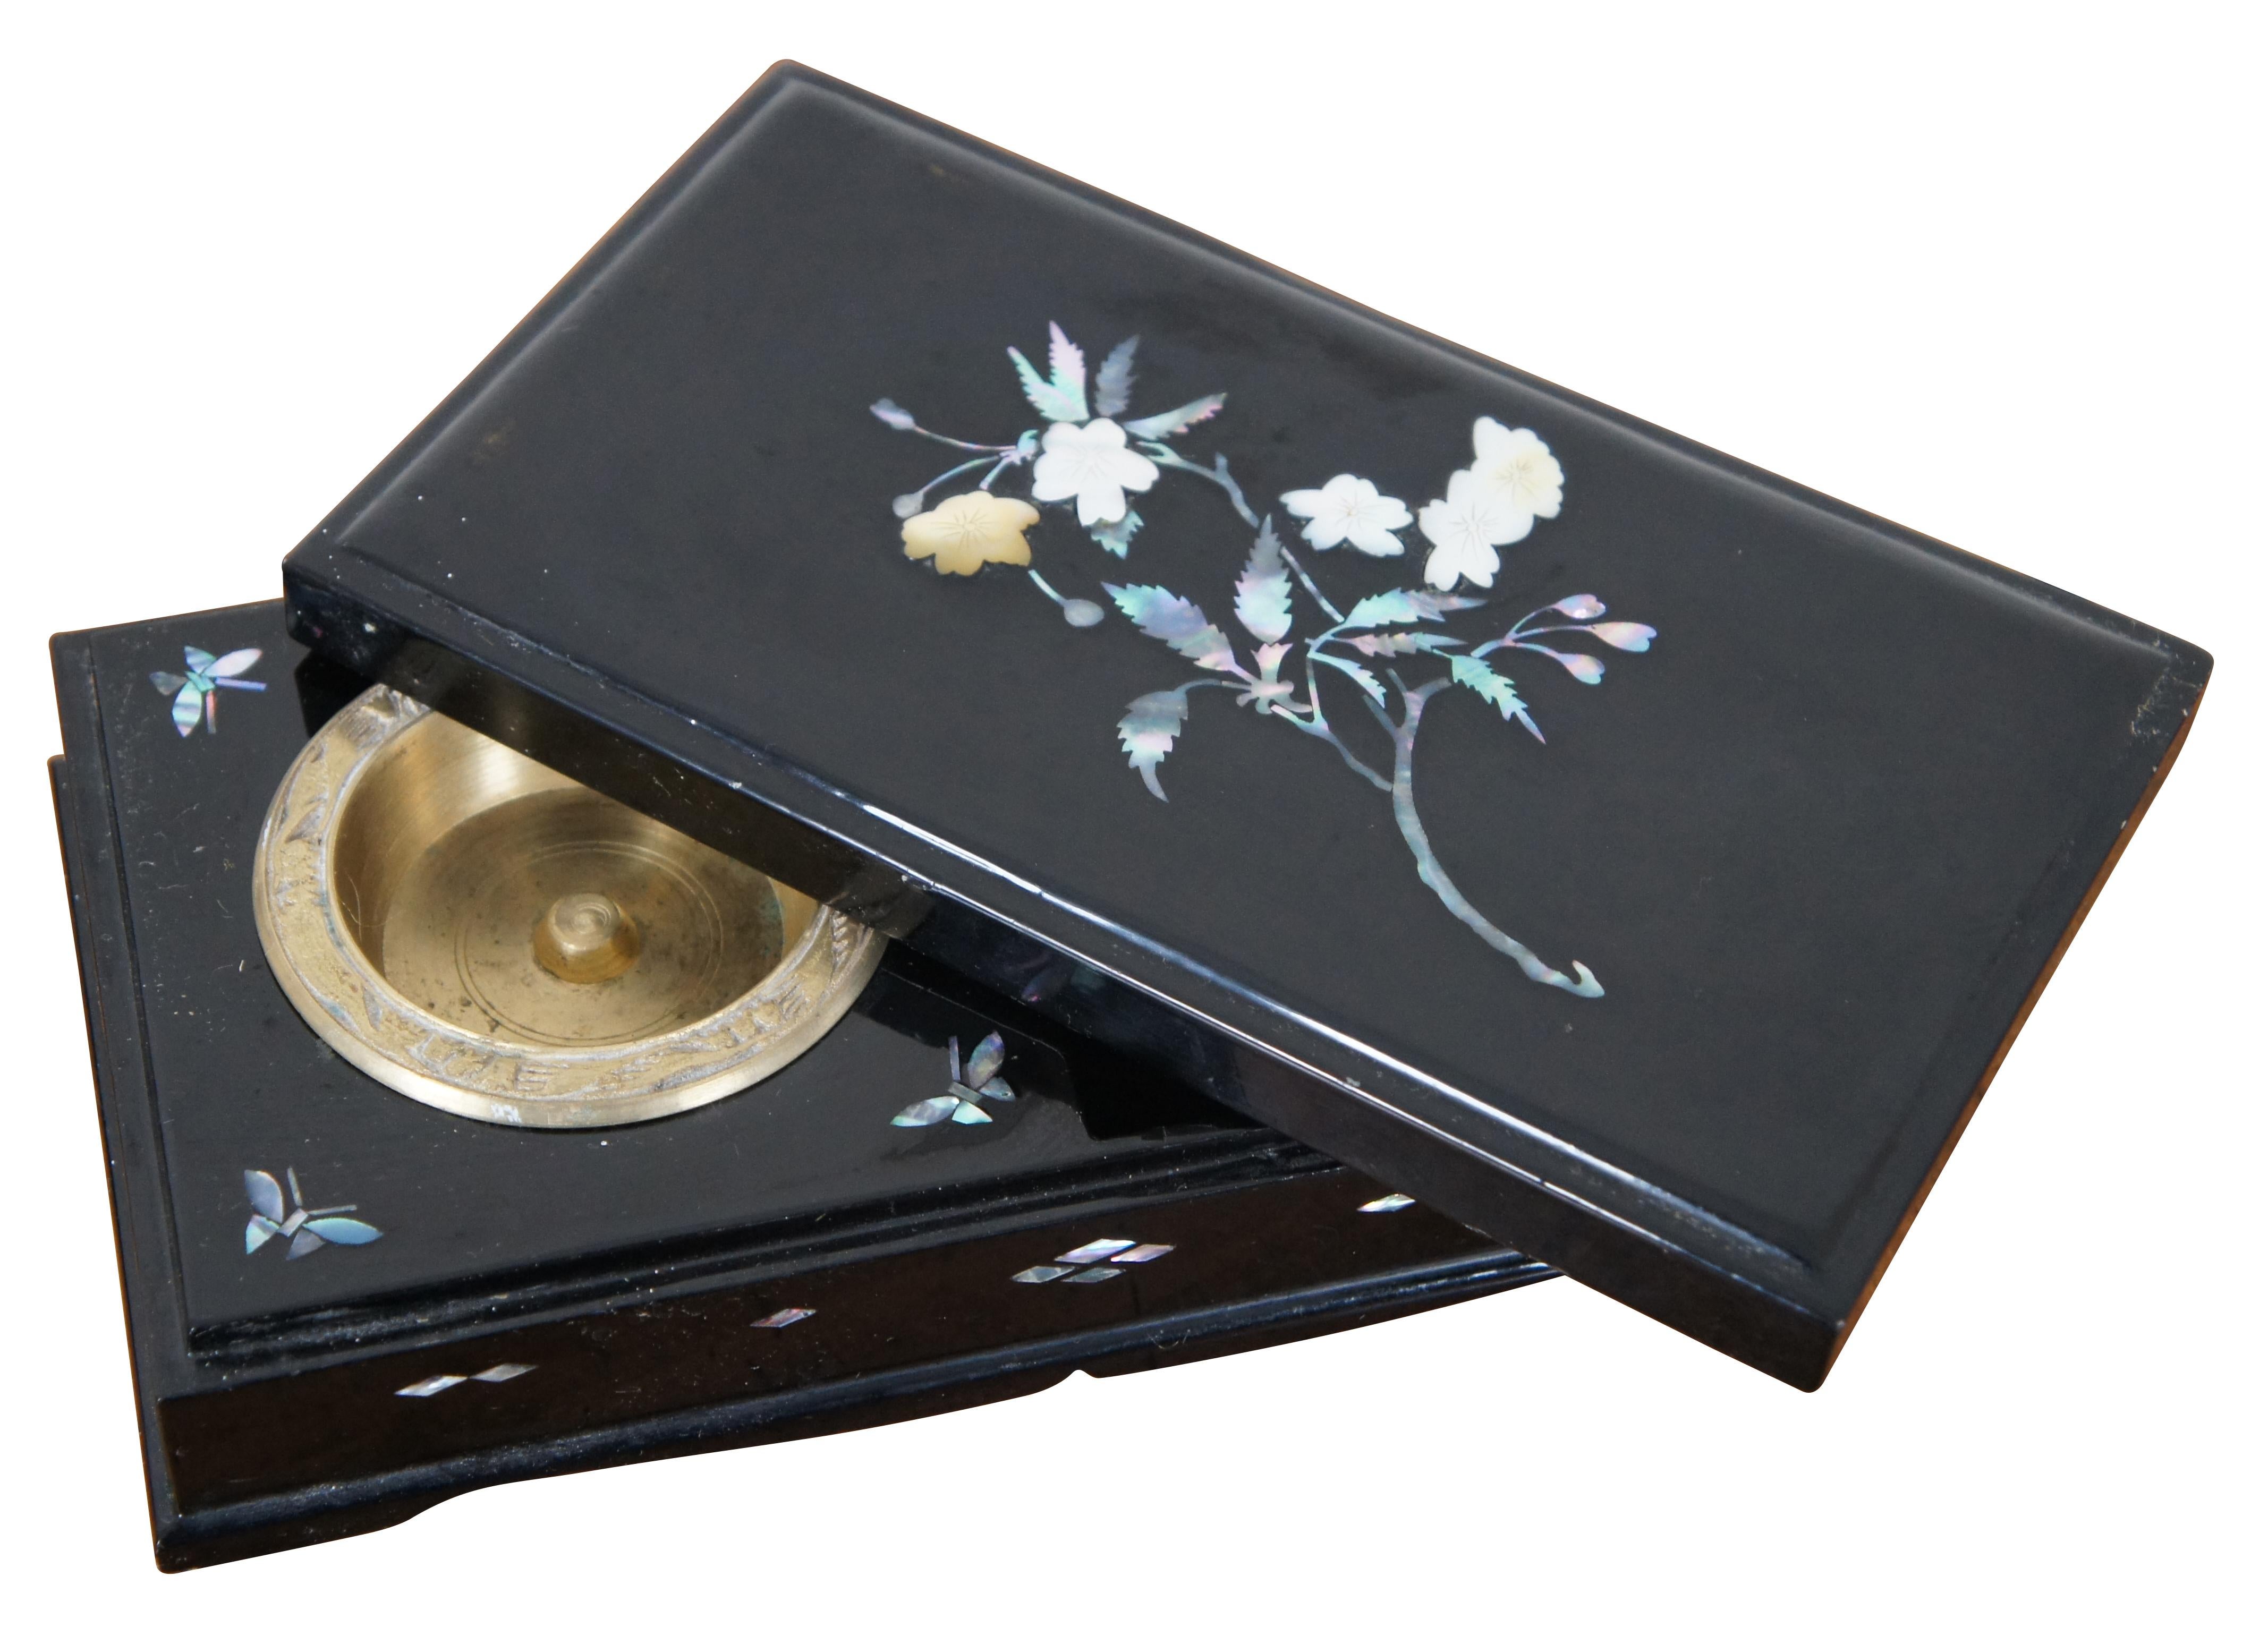 midcentury Japanese chinoiserie black lacquered cigarette box decorated with mother of pearl flowers and butterflies, opening to reveal compartment for cigarettes / tobacco and a brass ashtray, circa 1950s. Measure: 9